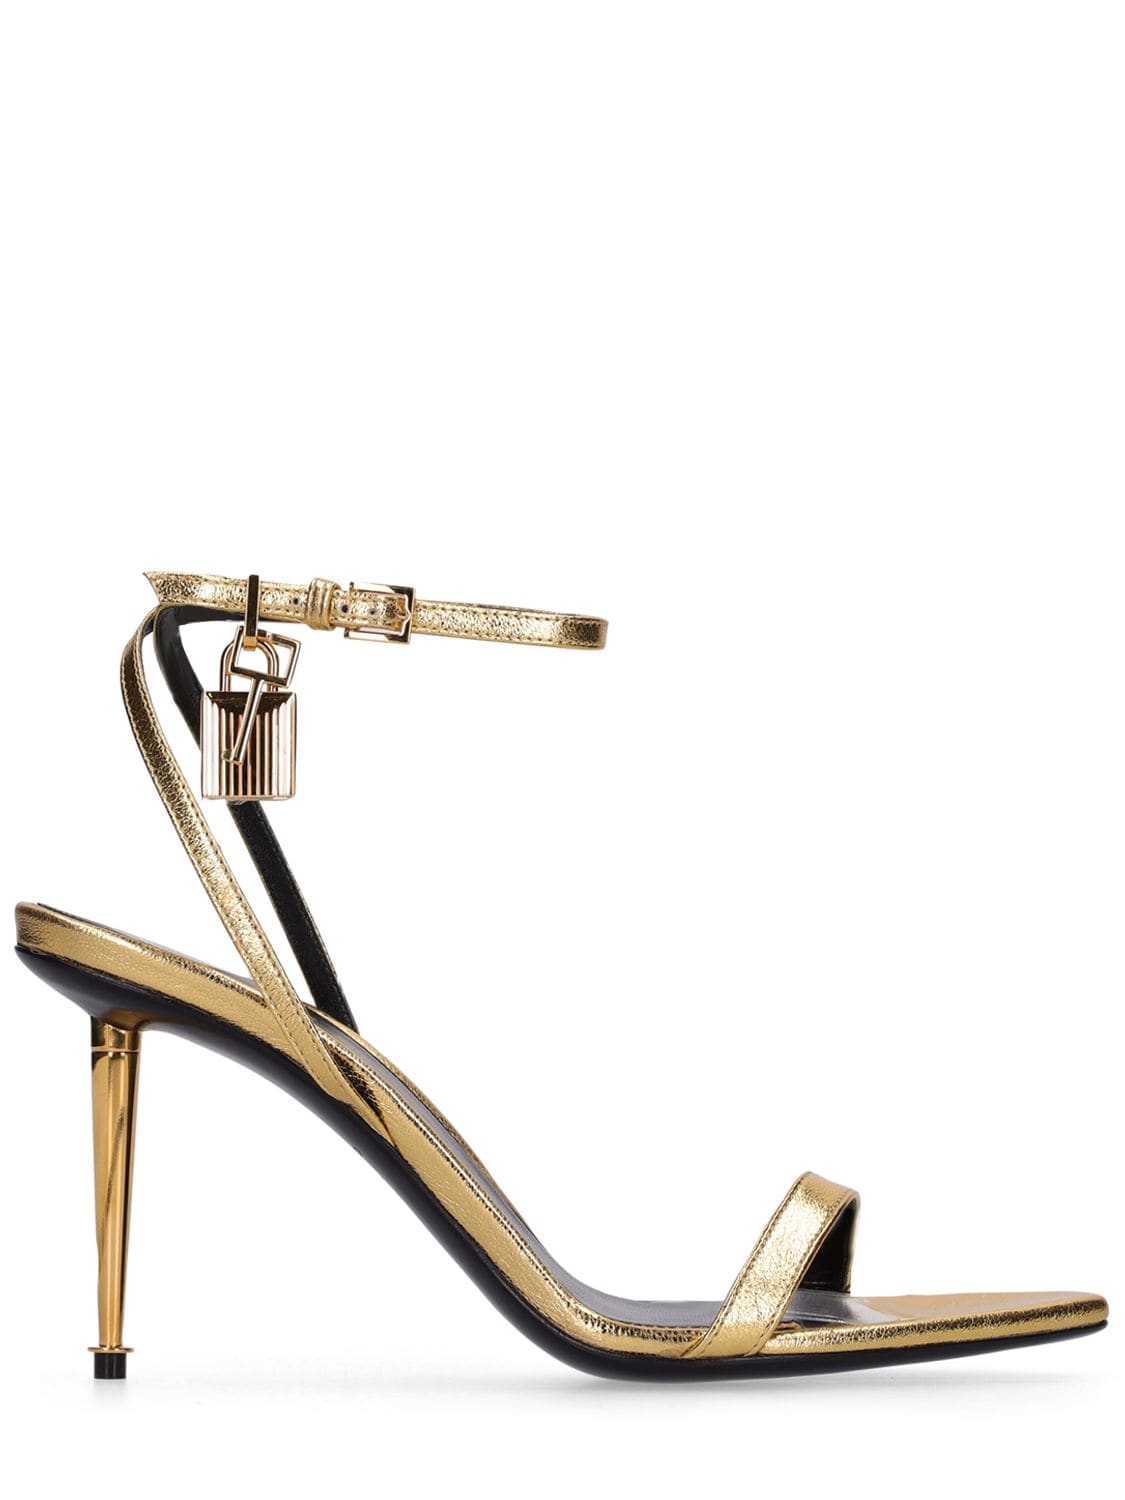 TOM FORD 85mm Padlock Laminated Leather Sandals